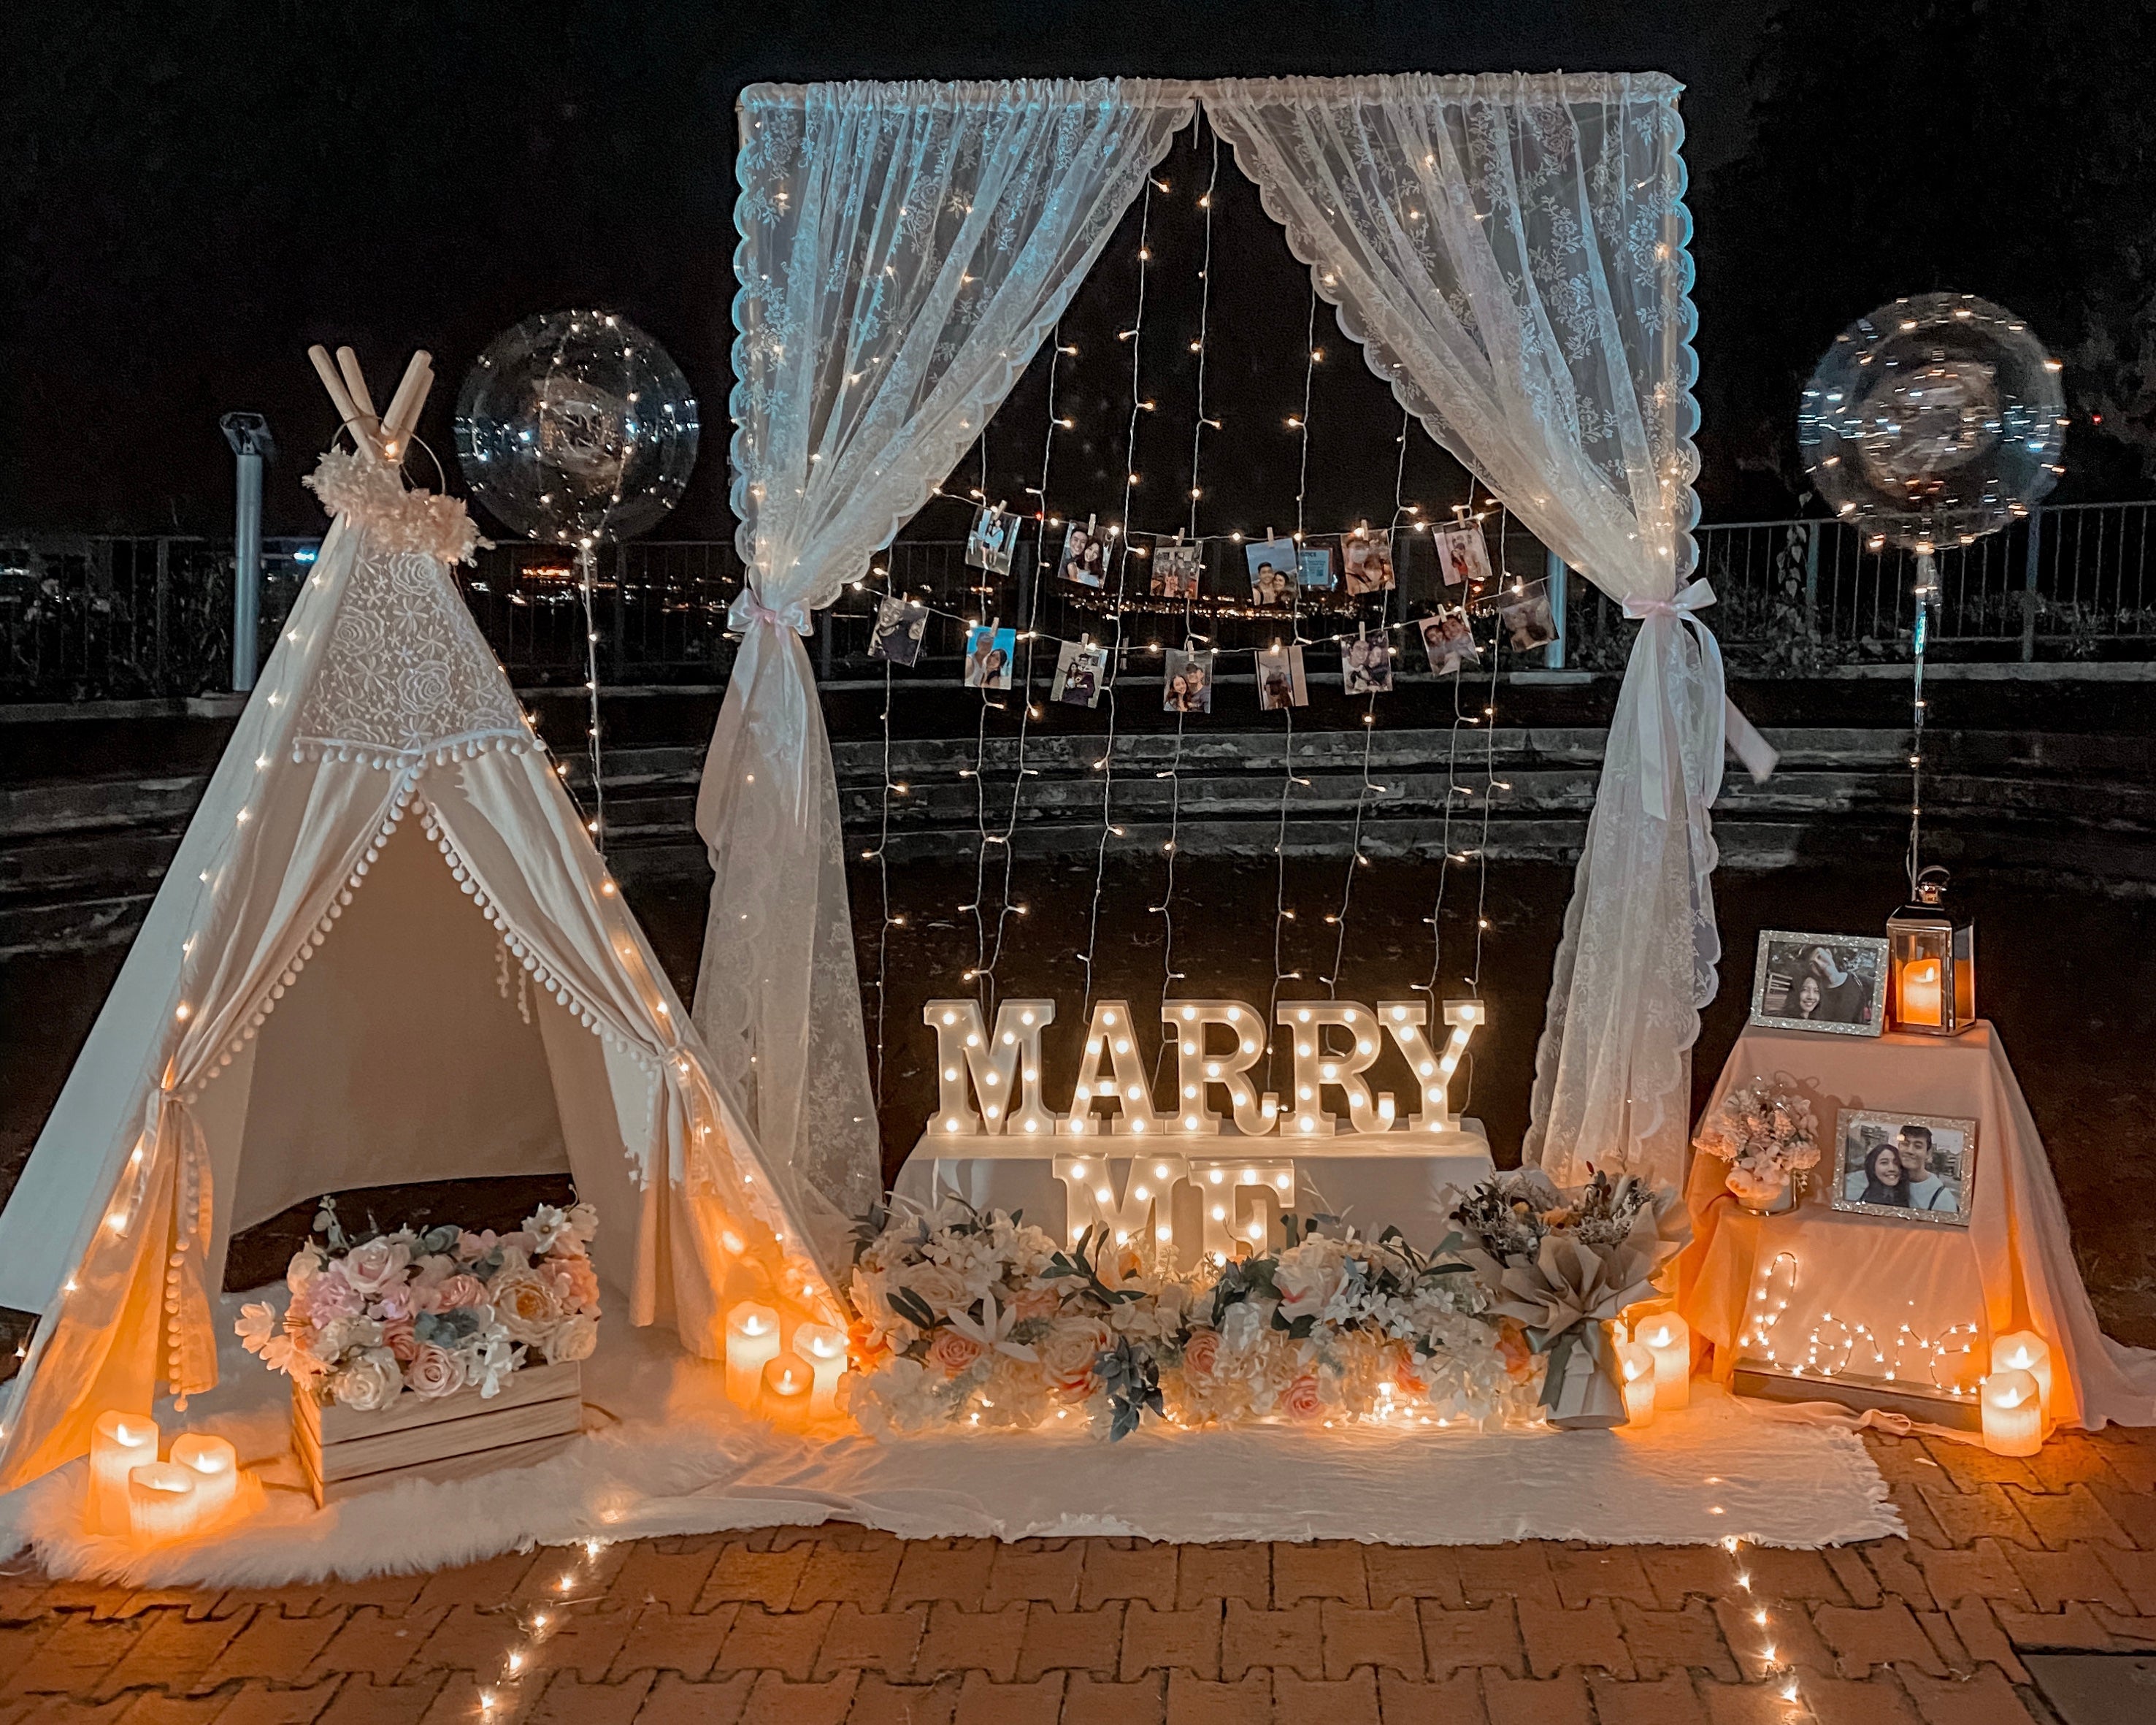 Romantic Outdoor Proposal Decor at Mount Faber Park Singapore with Fairylights, Flowers and Teepee Tent by Style It Simply